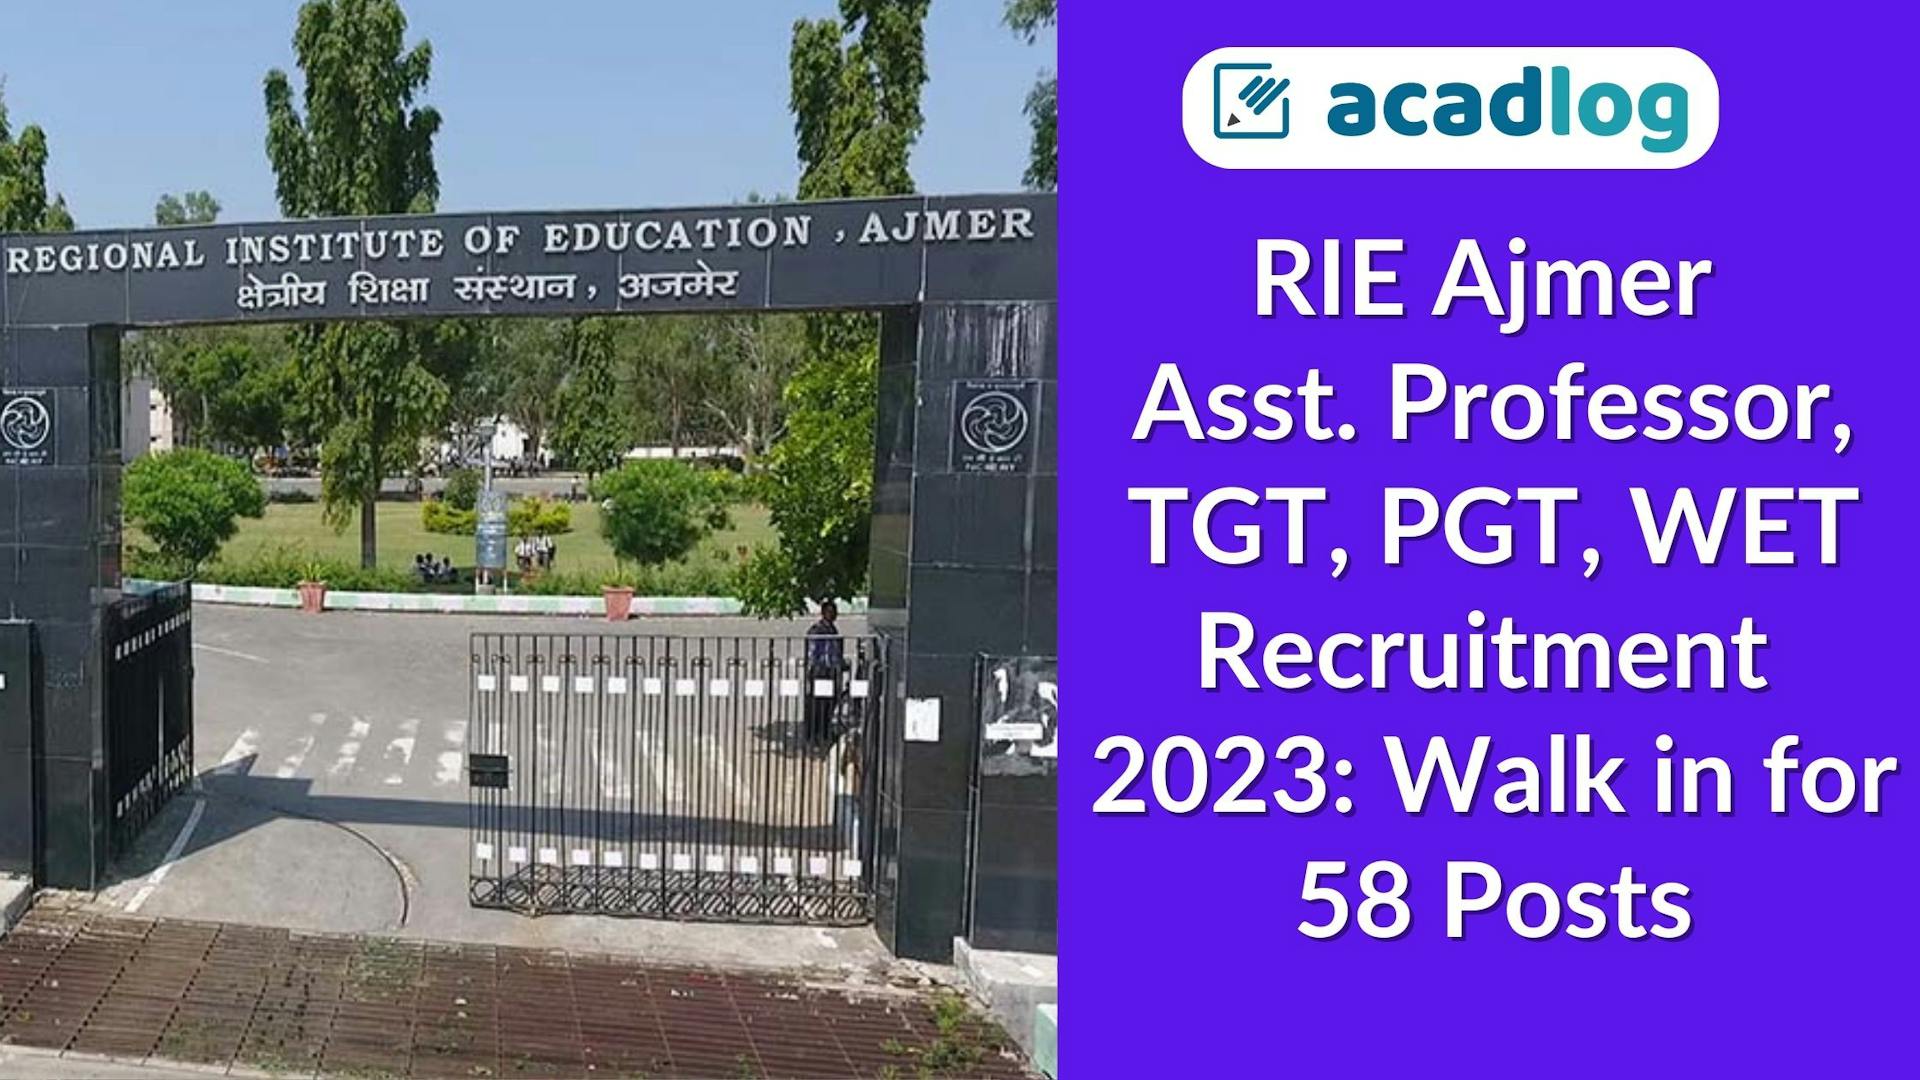 RIE Ajmer Assistant Professor, TGT, PGT Recruitment 2023: Walk in for 58 Posts